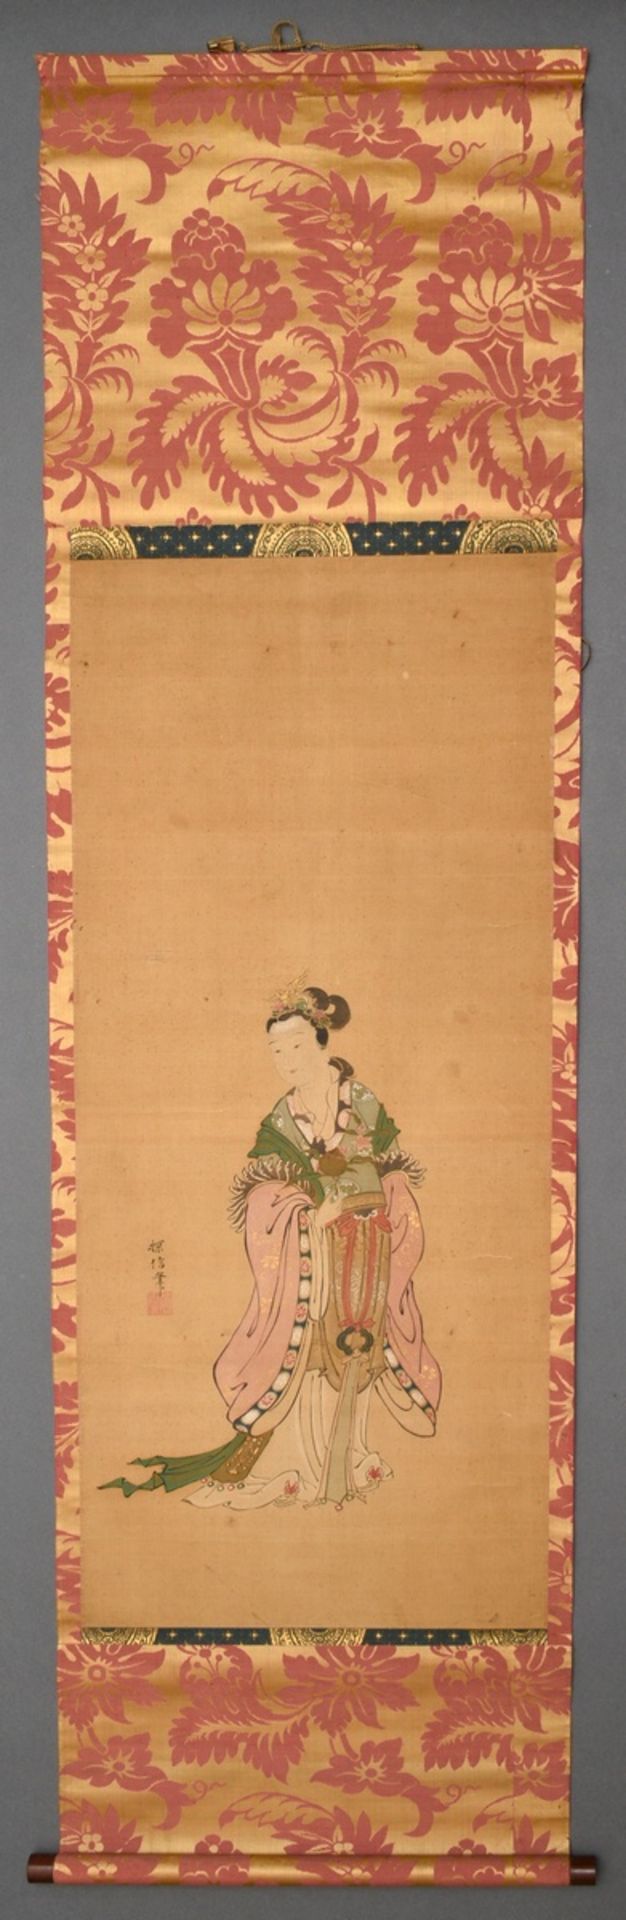 Japanese scroll painting "Seiobo, the Queen Mother of the West waits for a message", ukiyo-e painti